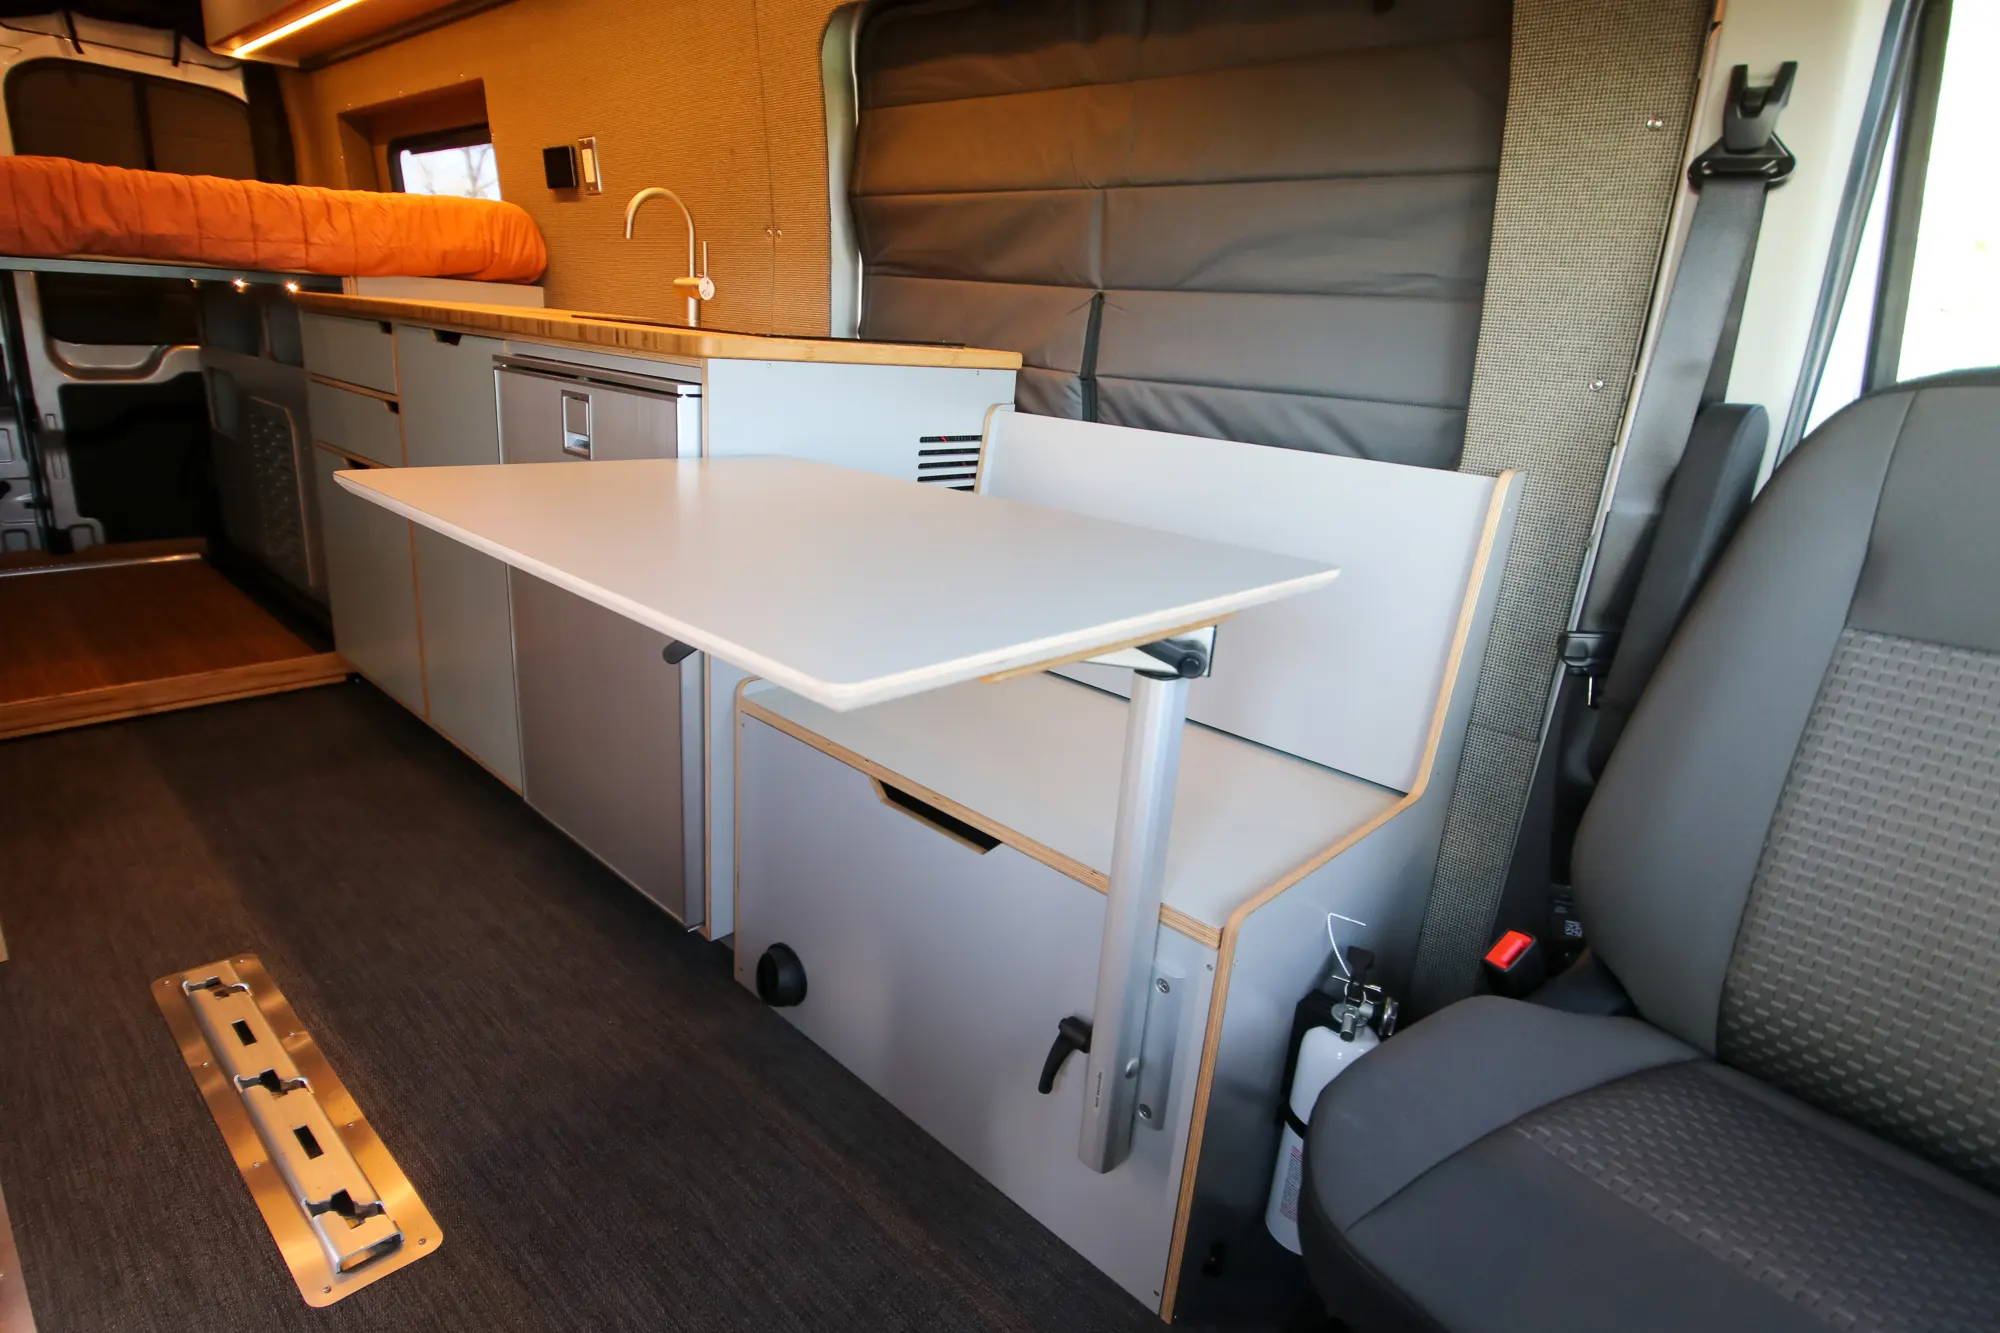 Adjustable Kitchen Table in Ford Transit Camper Conversion Van by The Vansmith